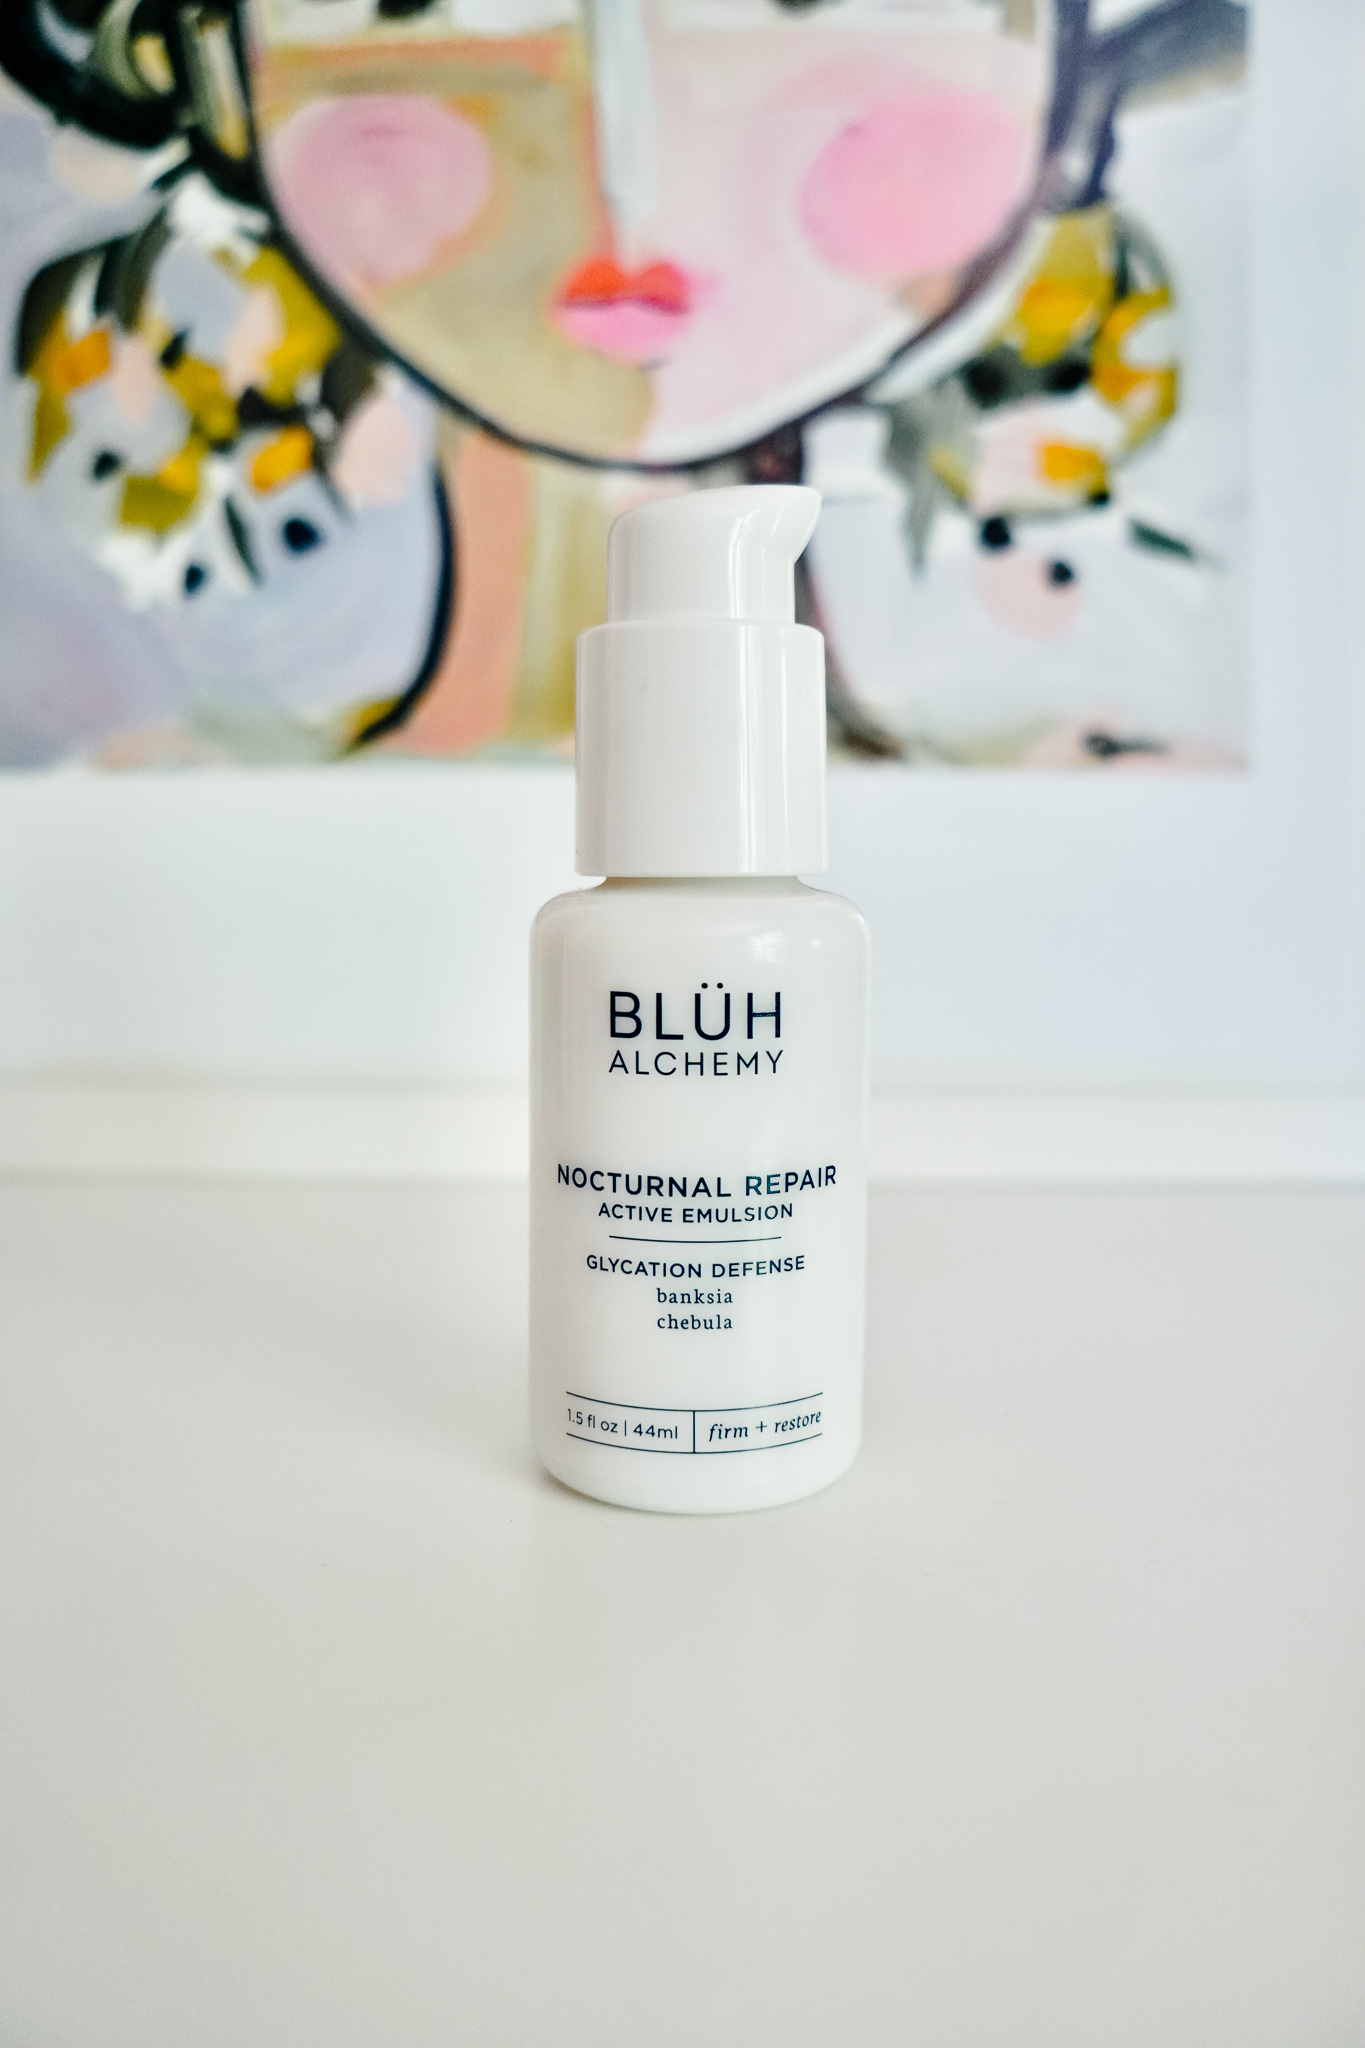 Sharing the June Beauty Heroes with BLÜH ALCHEMY